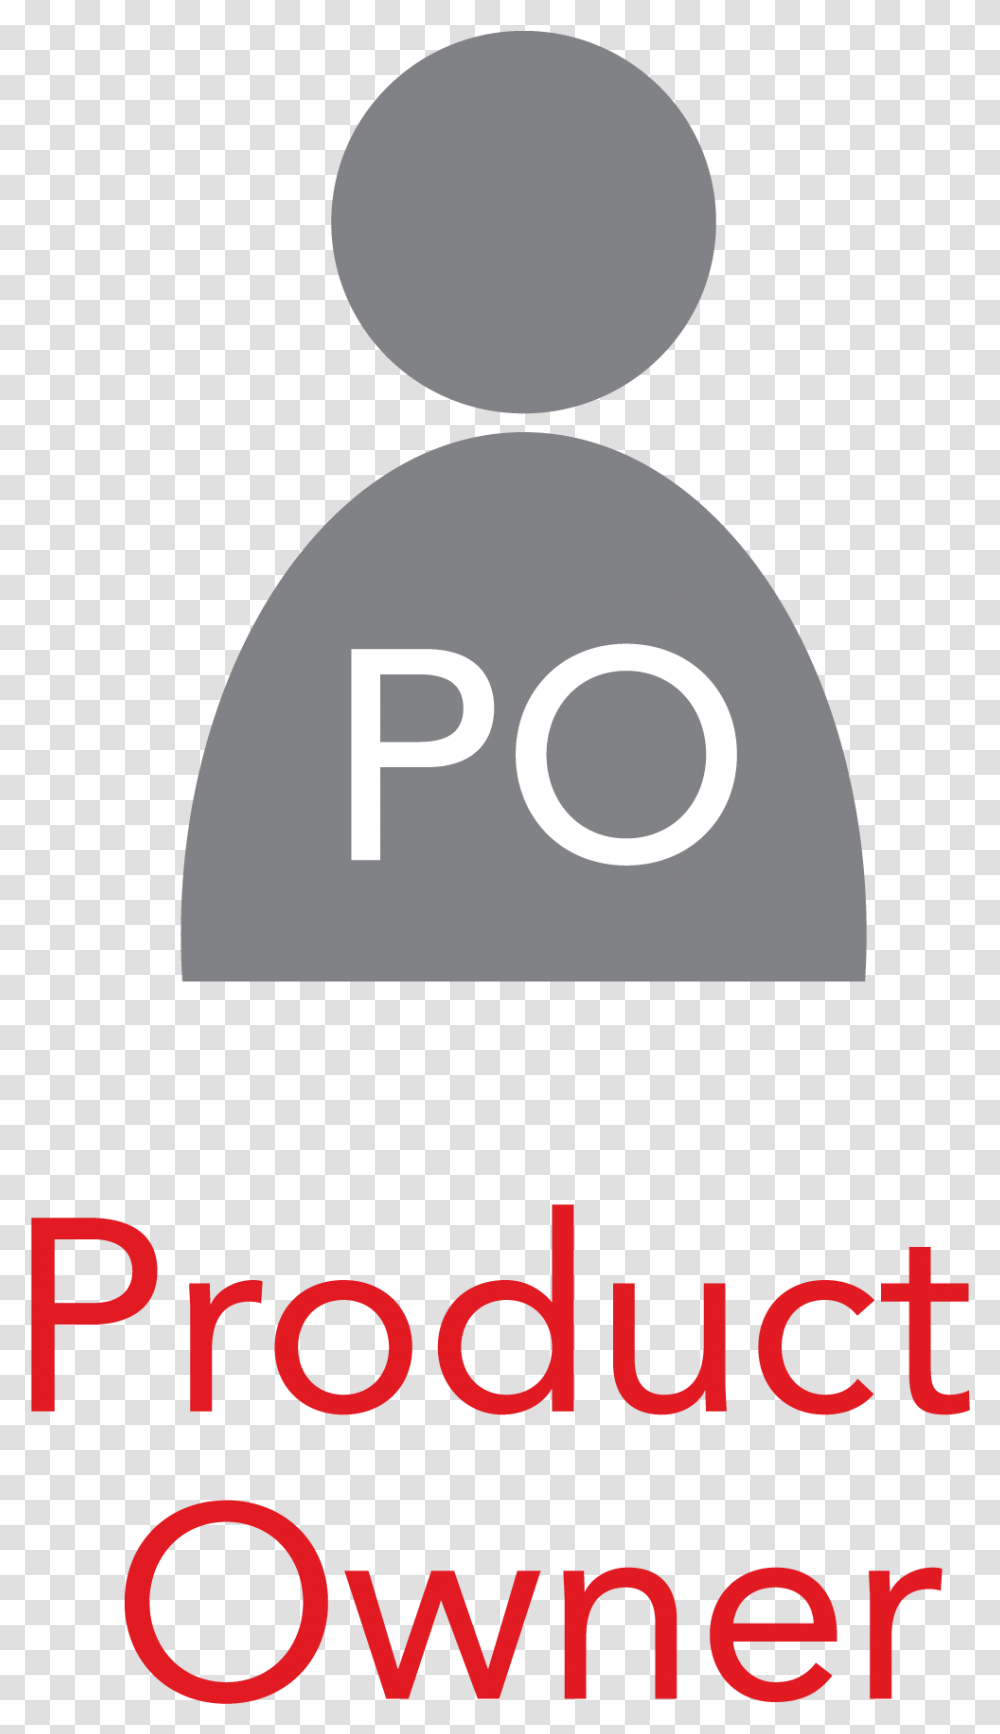 Icon Agile Product Owner Download Agile Team Product Owner Icon, Logo, Alphabet Transparent Png